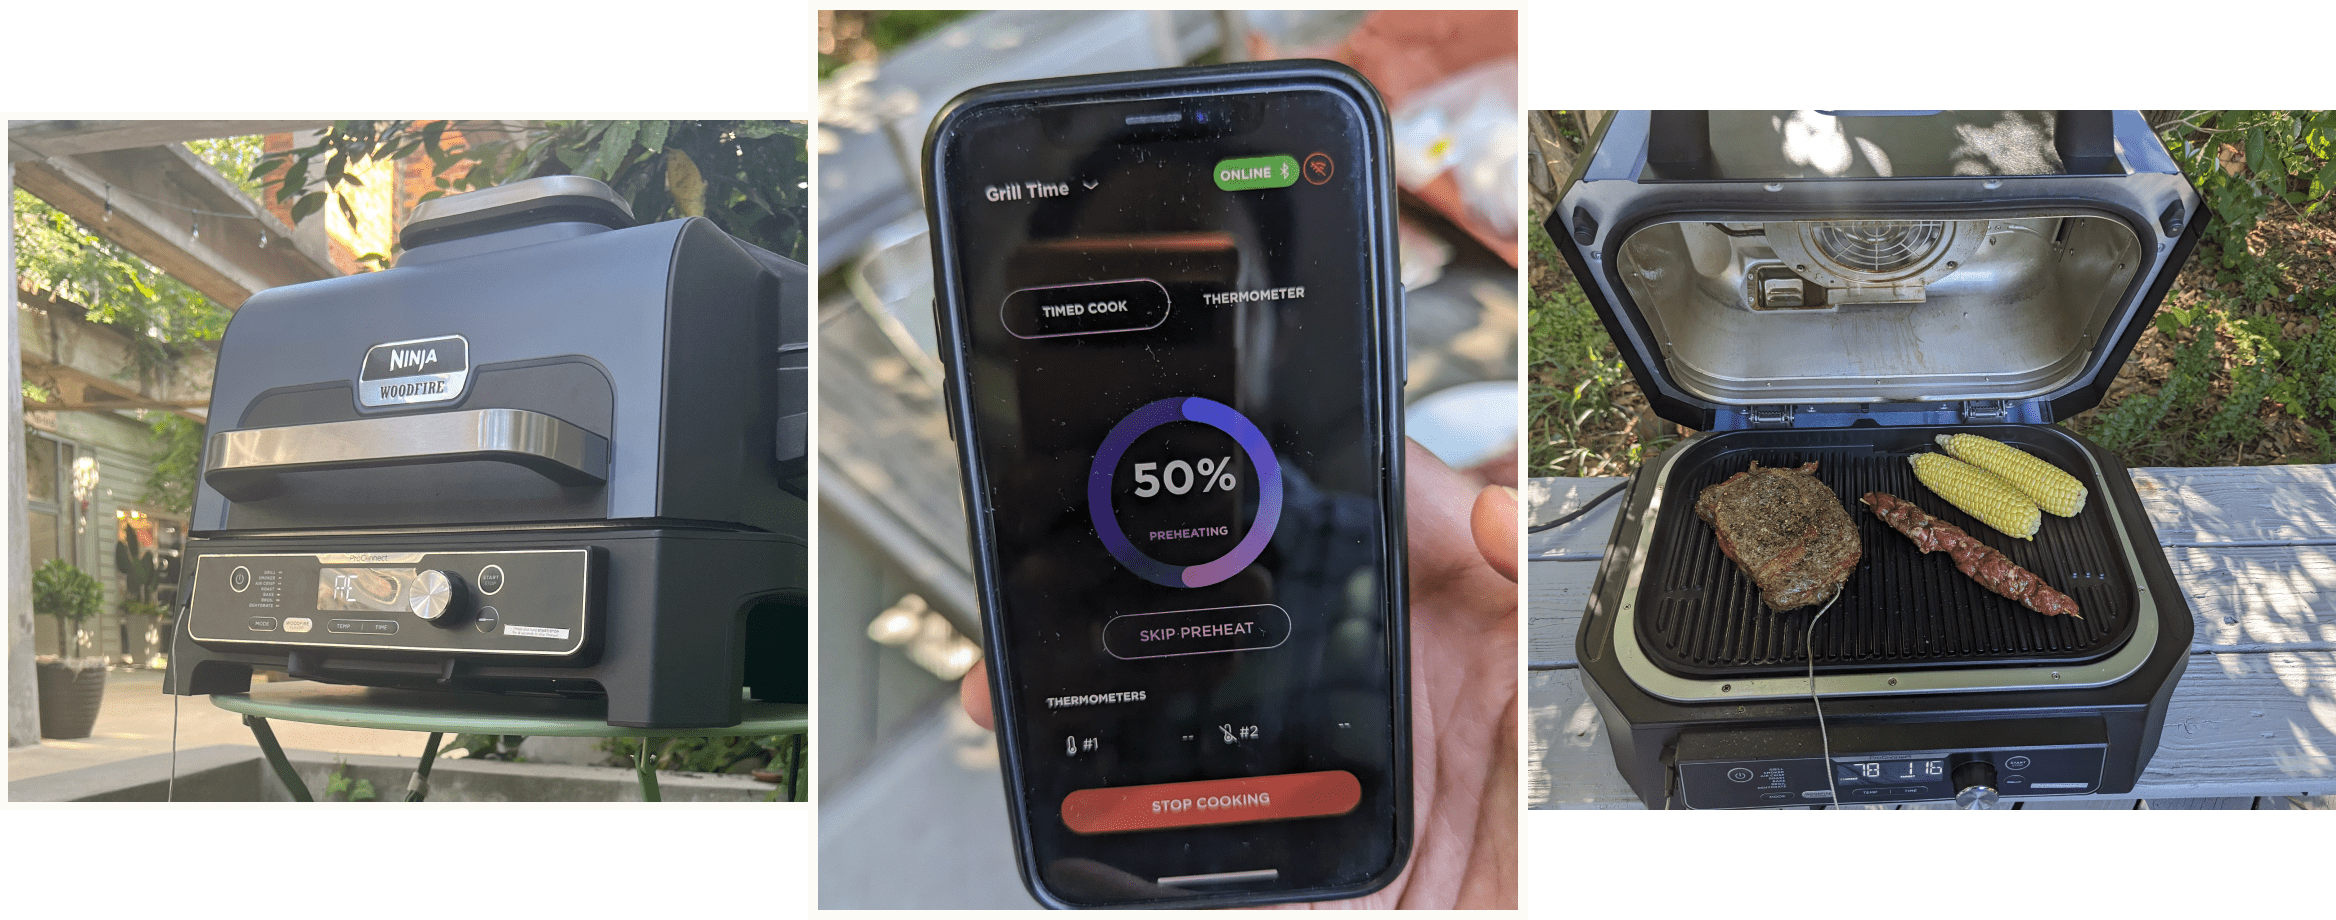 Photo collage of the Ninja Pro Connect app and Grill